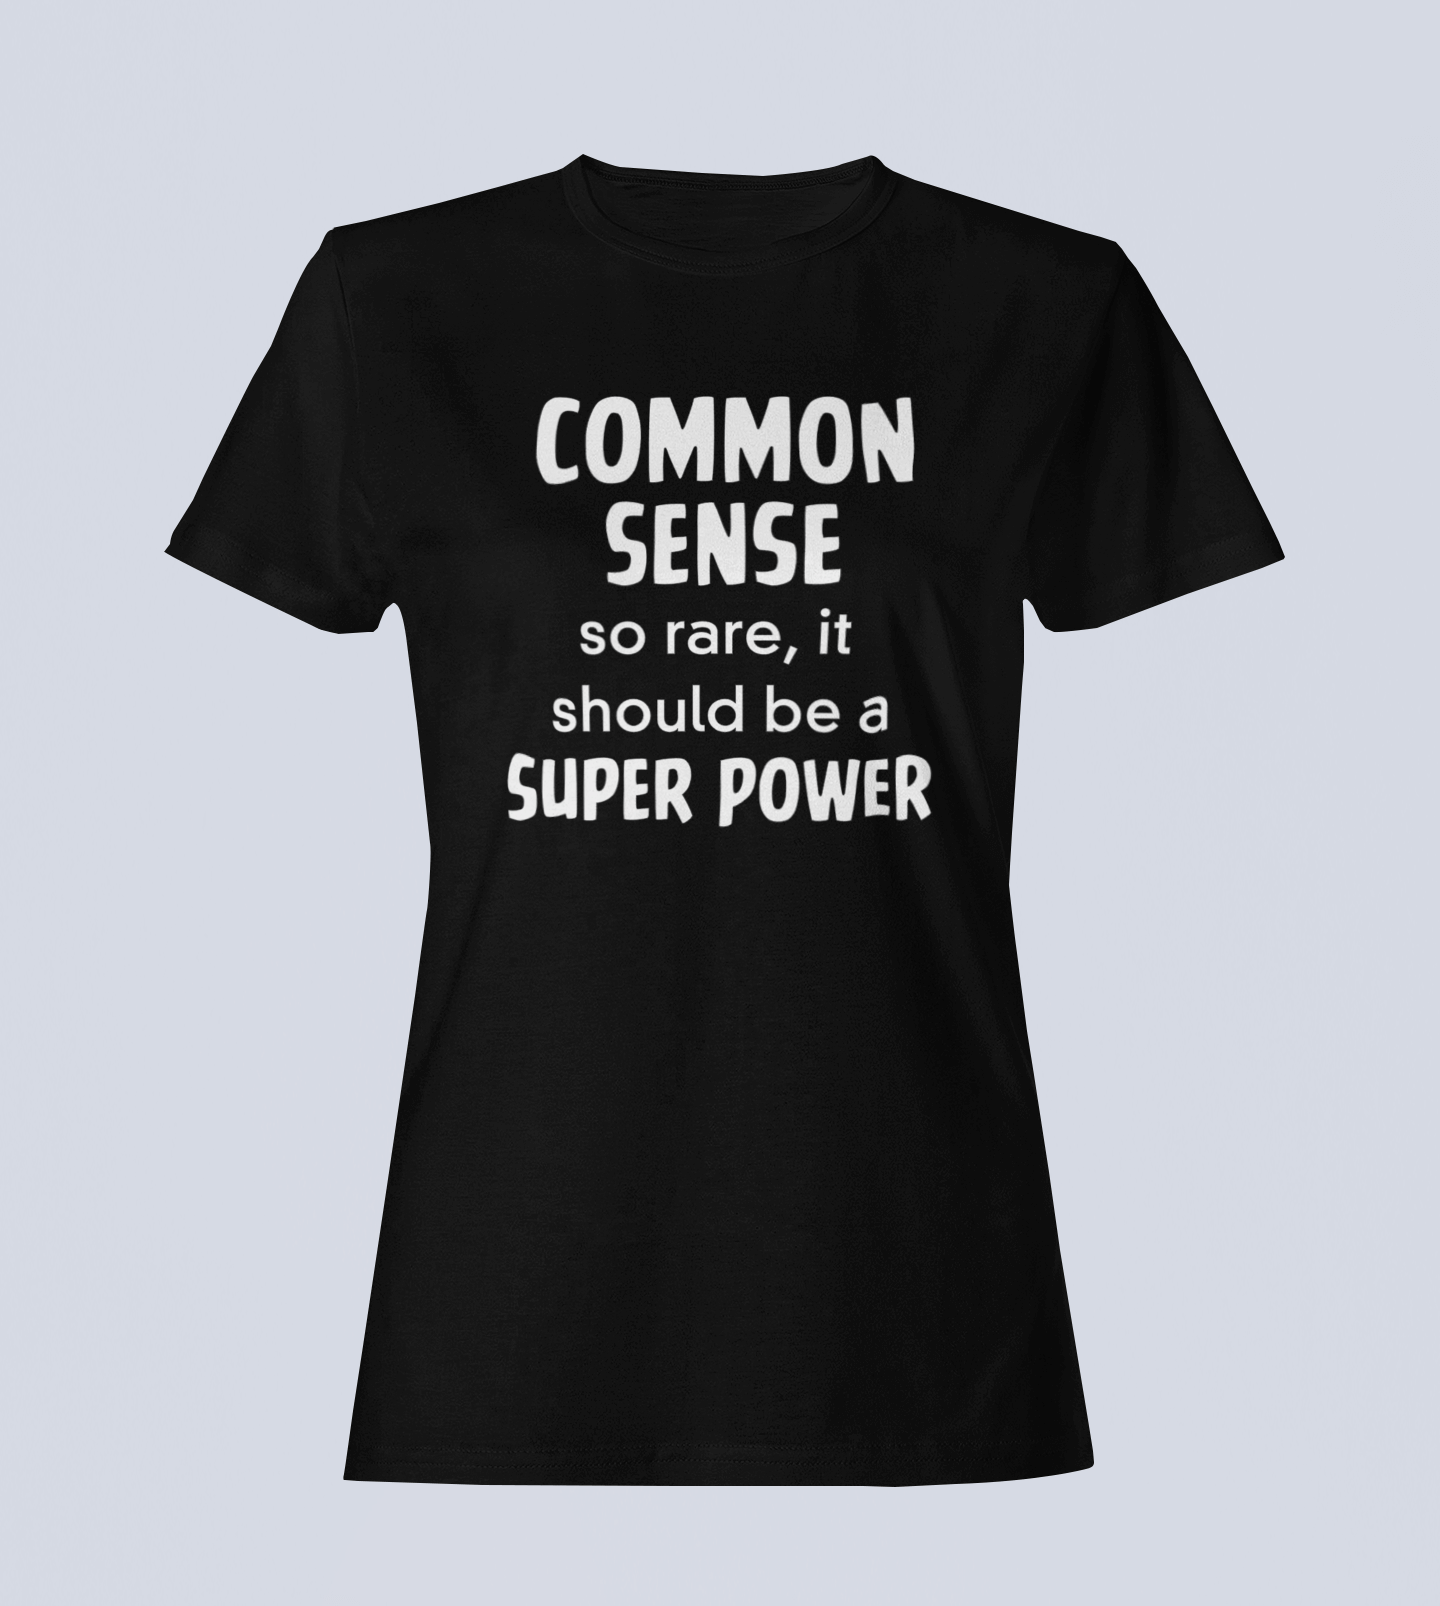 Common Sense: So Rare It Should Be a Superpower - Ladies